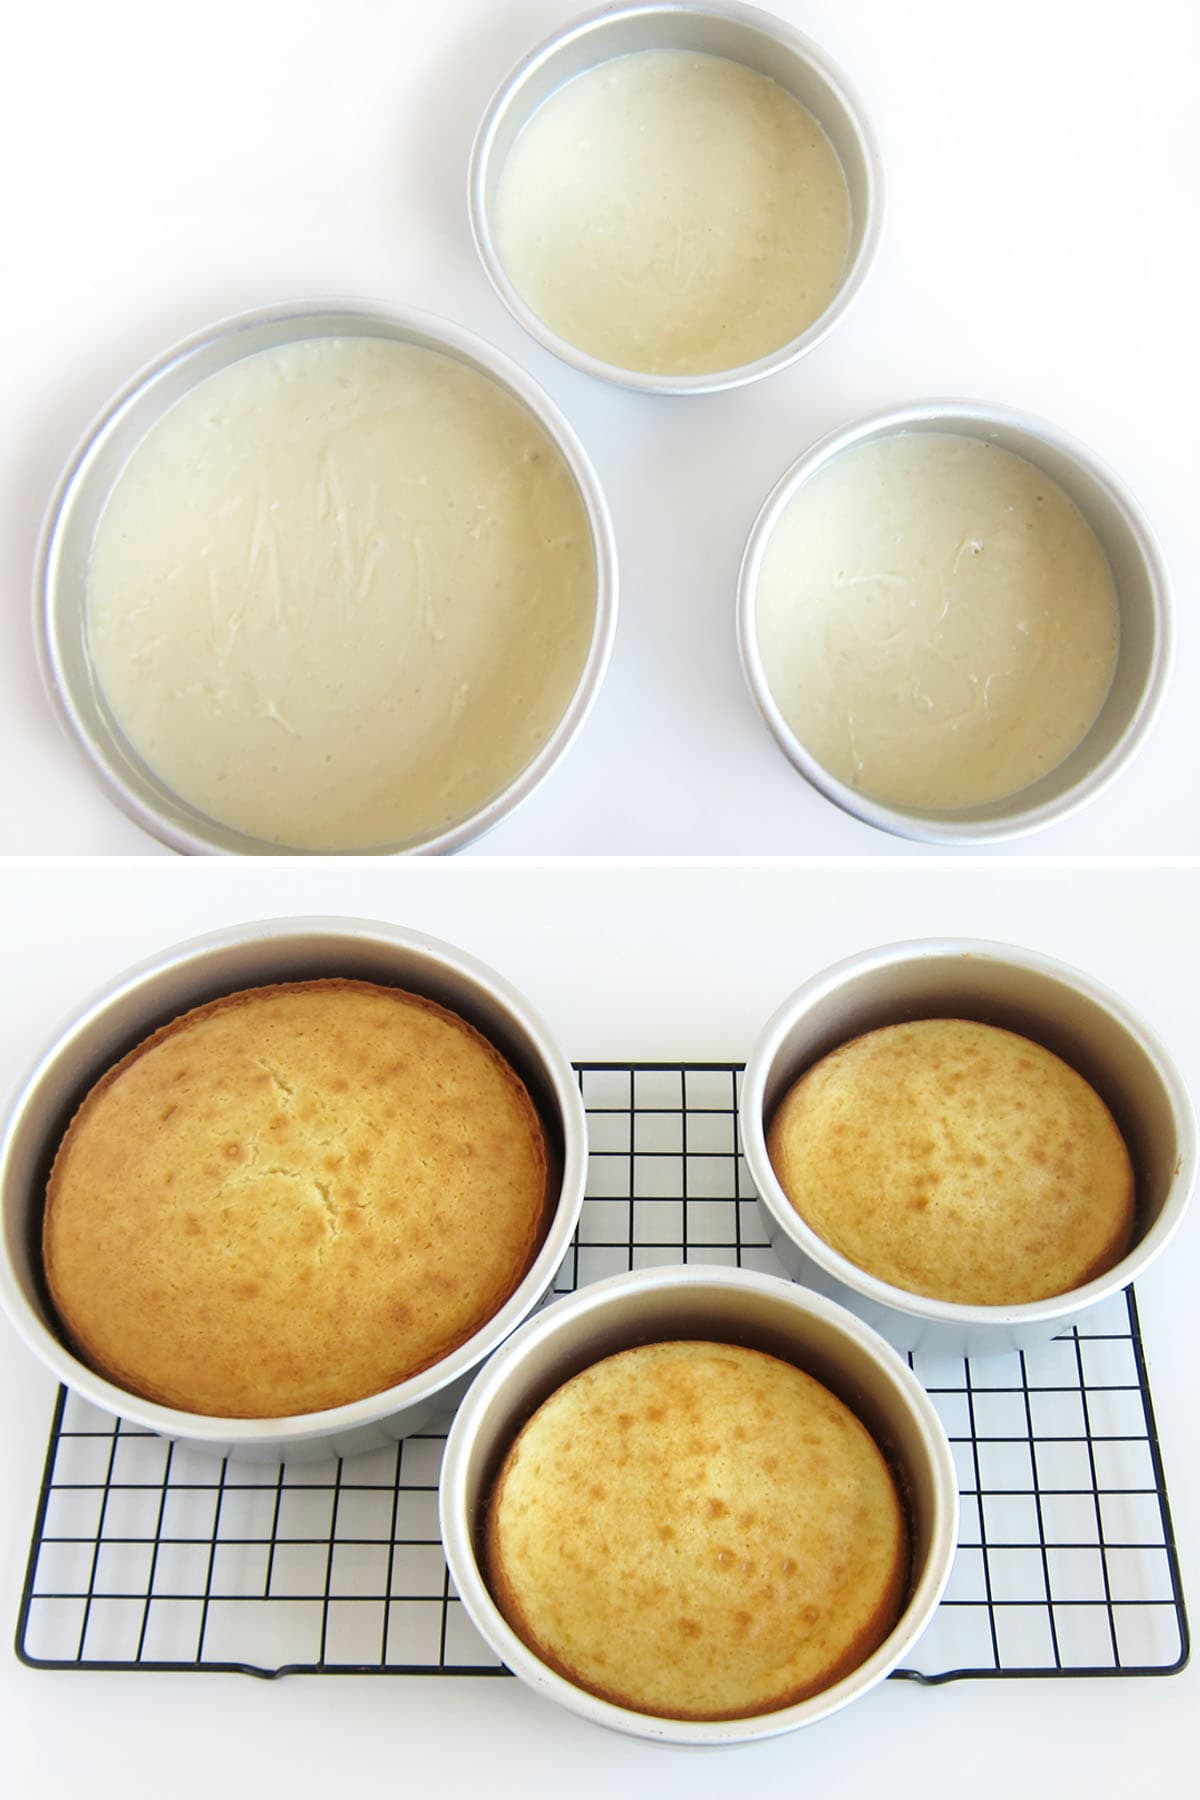 Cake batter in one 8-inch cake pan and two 6-inch round cake pans and baked cakes on a cooling rack.